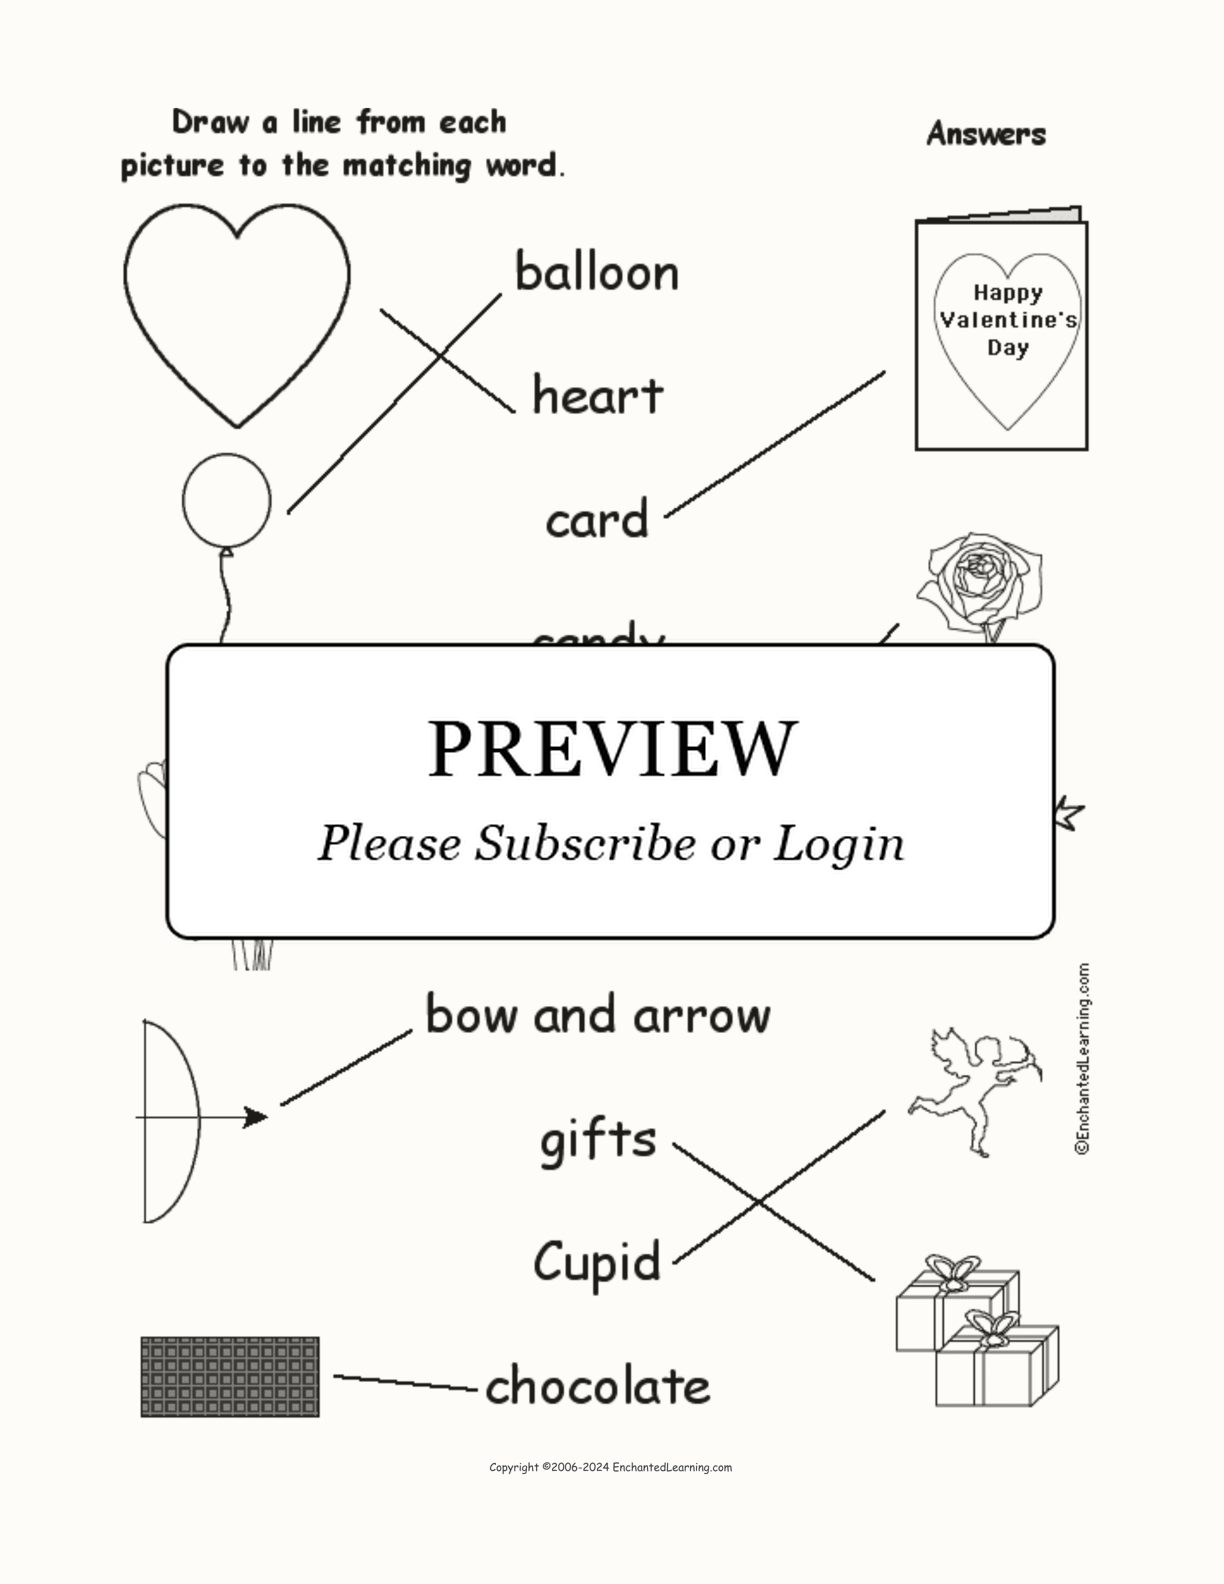 Valentine's Day - Match the Words to the Pictures interactive worksheet page 2